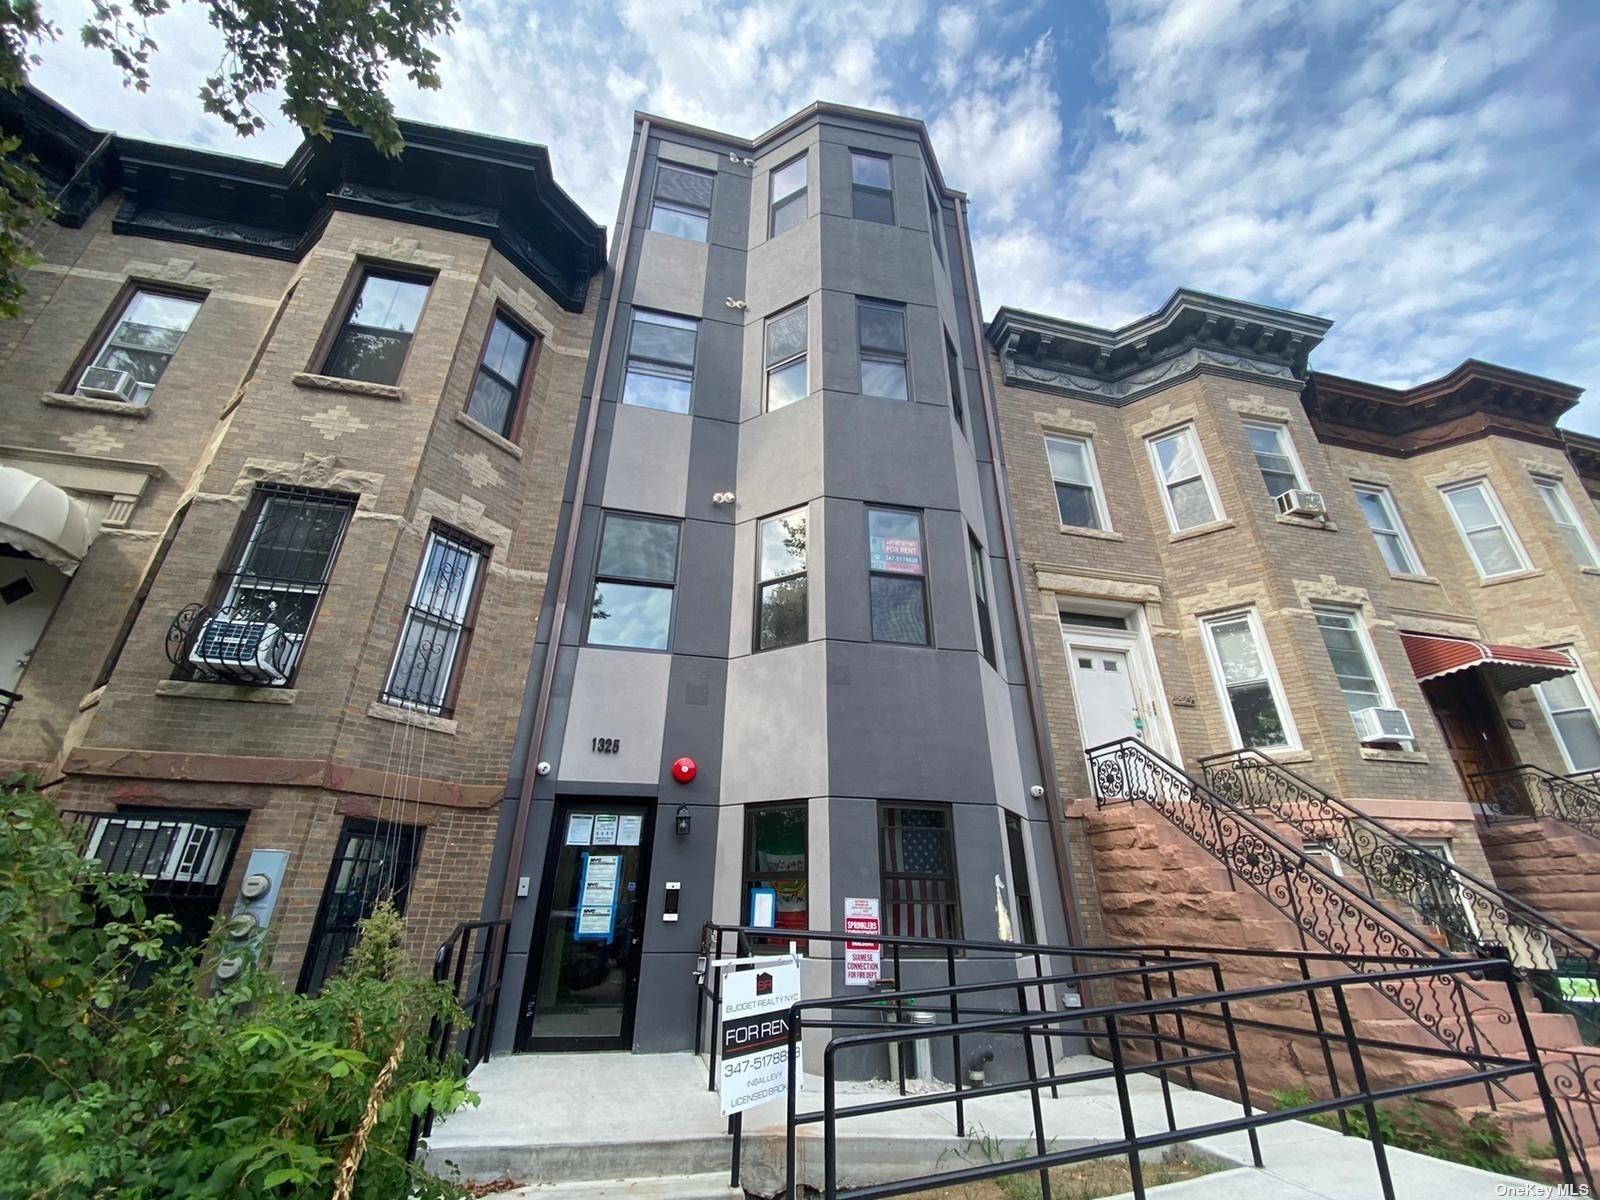 8 Family Building in Crown Heights - Prospect  Brooklyn, NY 11213